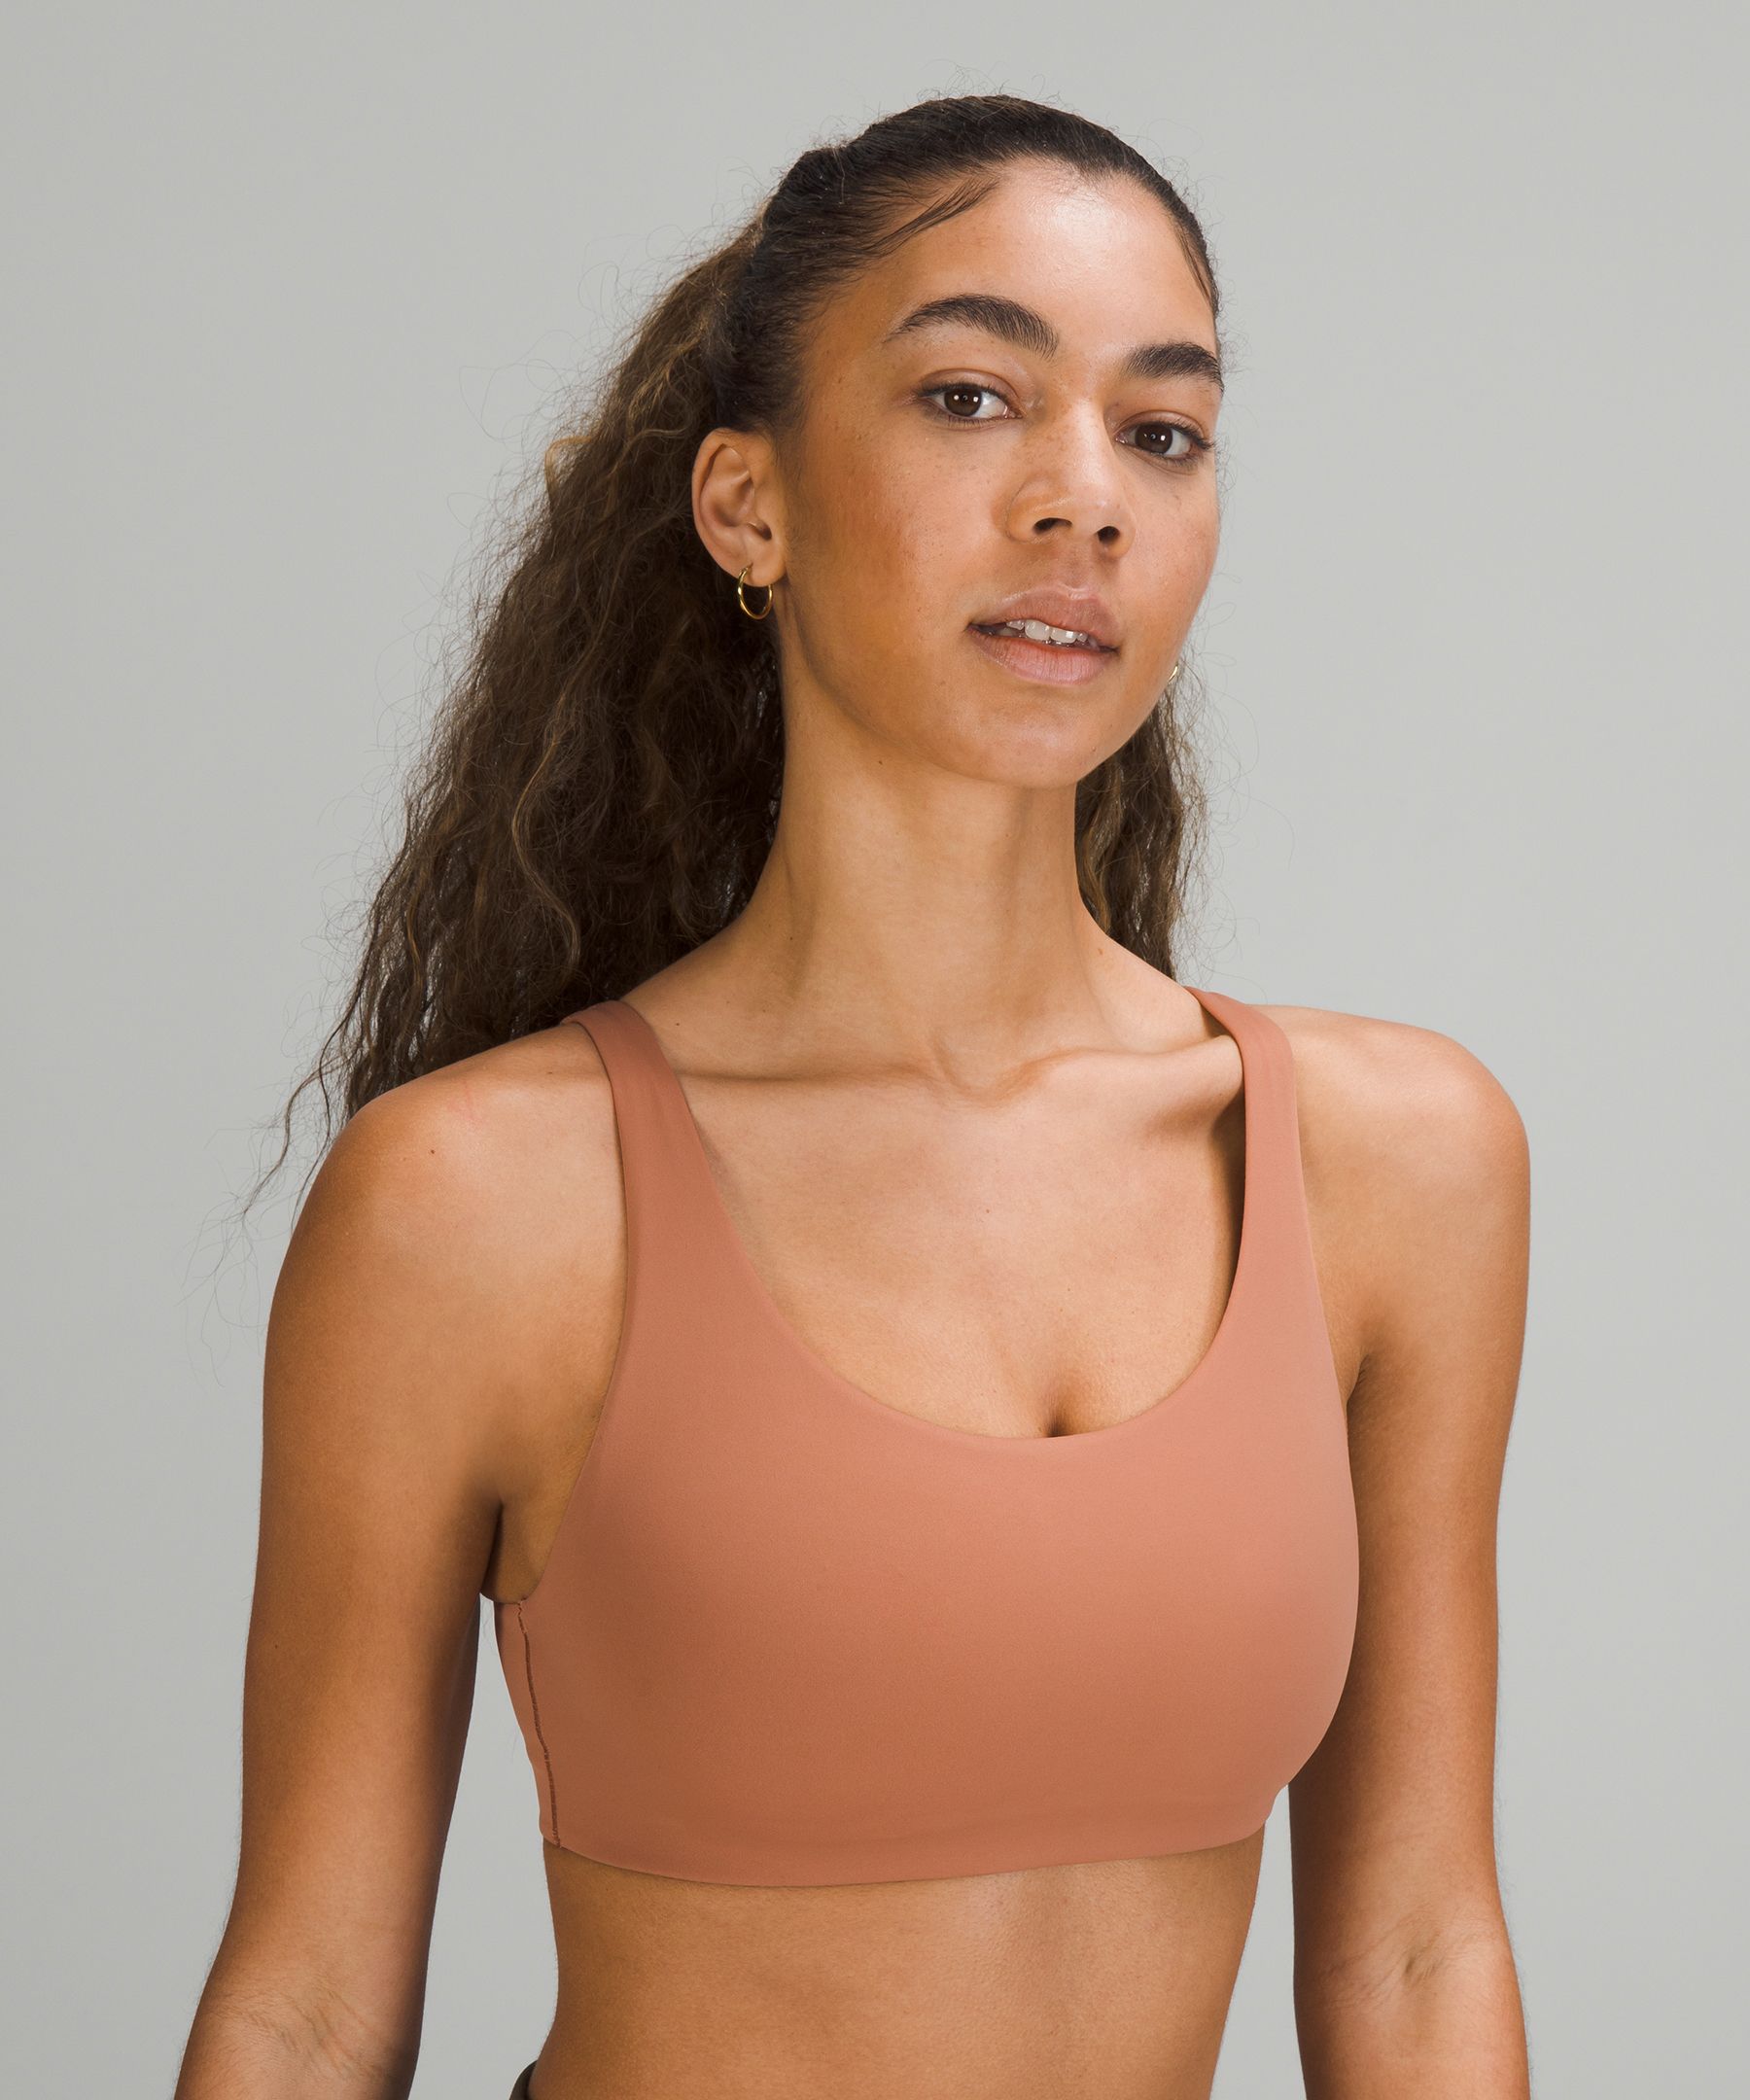 Lululemon Women's In Alignment Straight-Strap Bra Light Support, A/B Cup